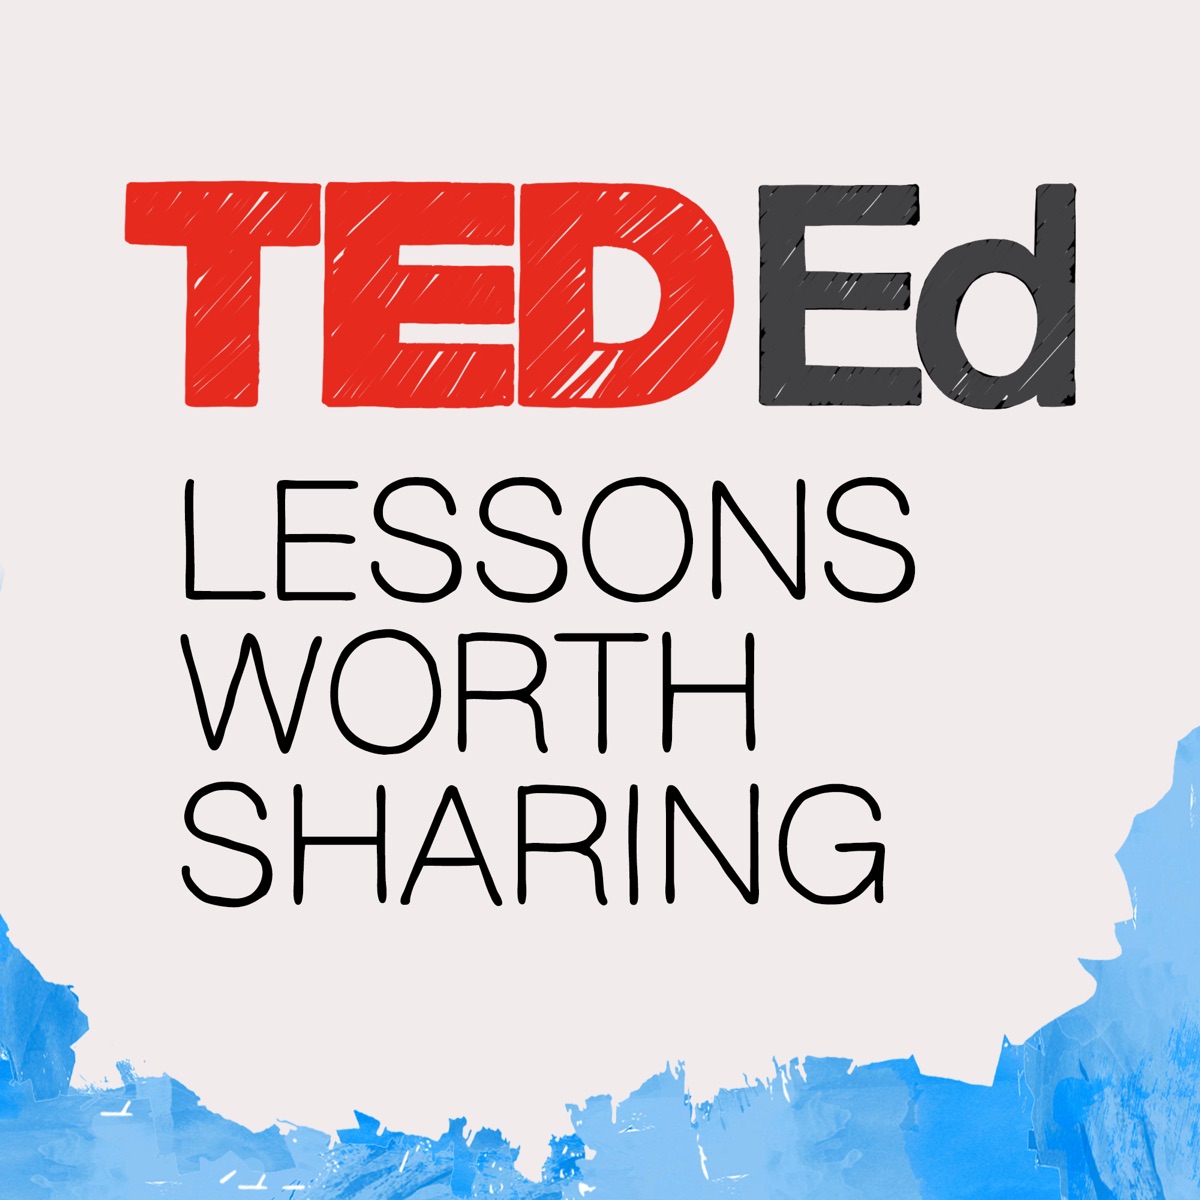 ted education lessons